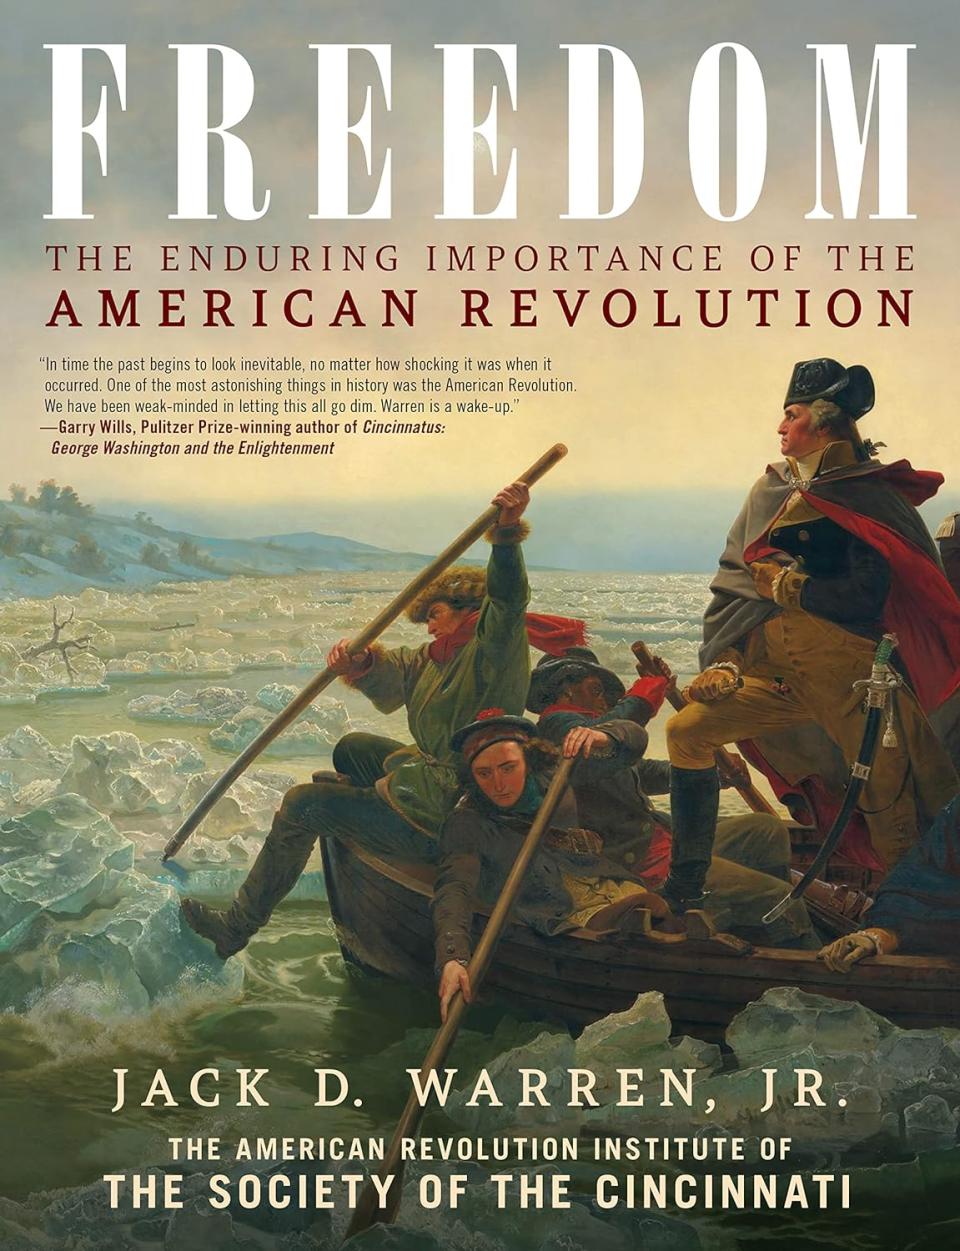 “Freedom: The Enduring Importance of the American Revolution”